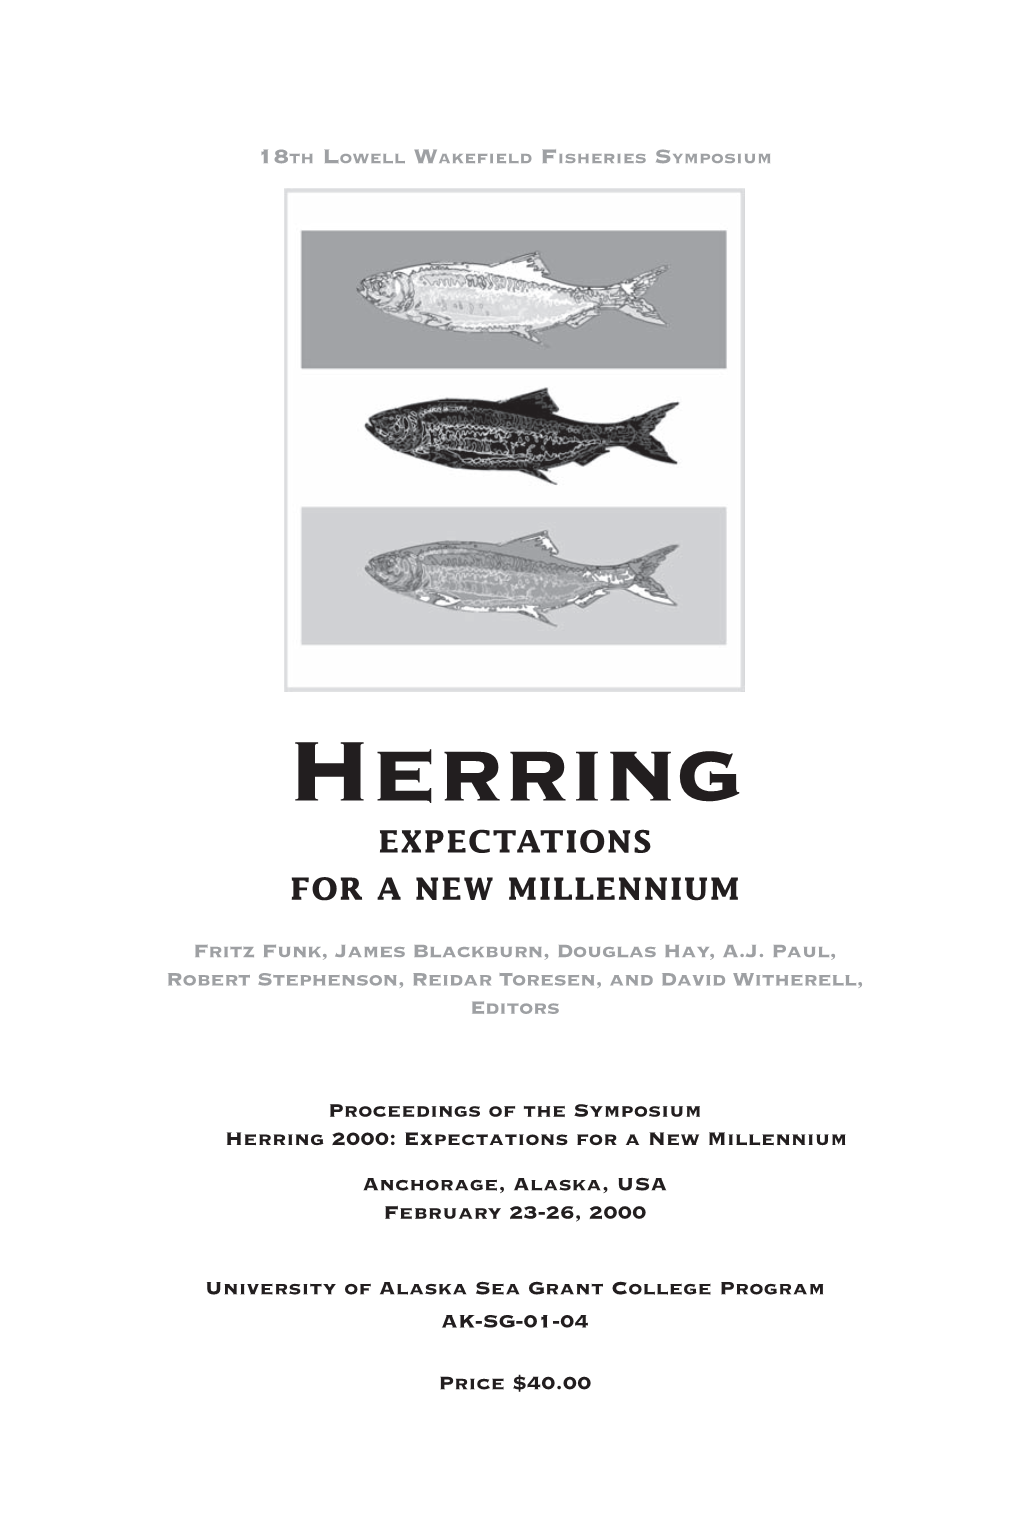 Herring EXPECTATIONS for a NEW MILLENNIUM